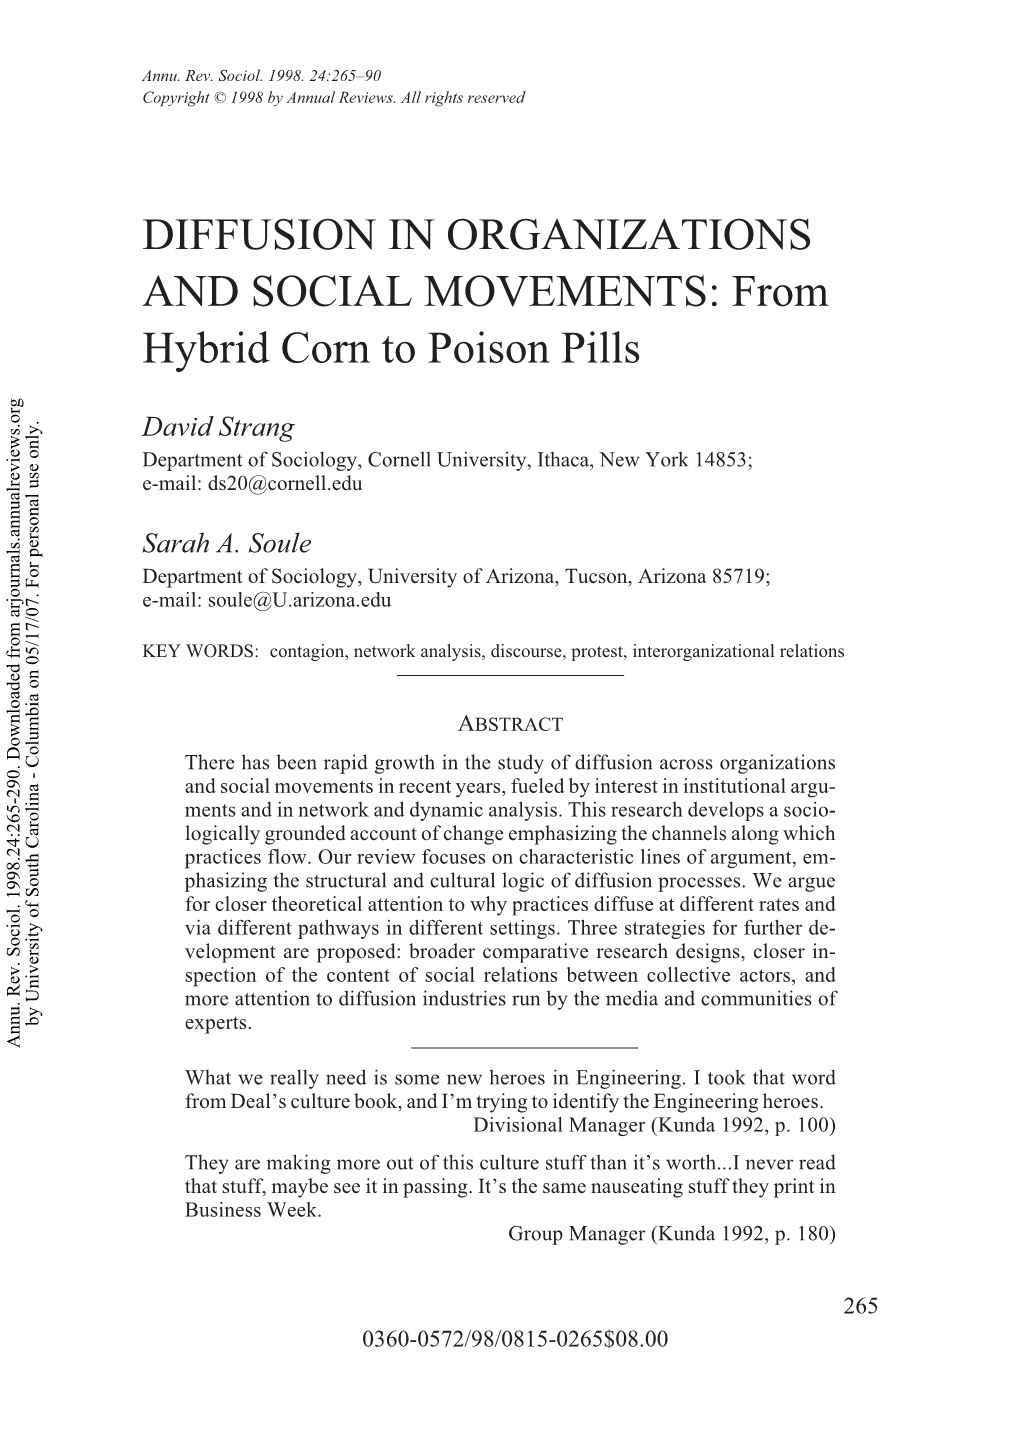 DIFFUSION in ORGANIZATIONS and SOCIAL MOVEMENTS: from Hybrid Corn to Poison Pills